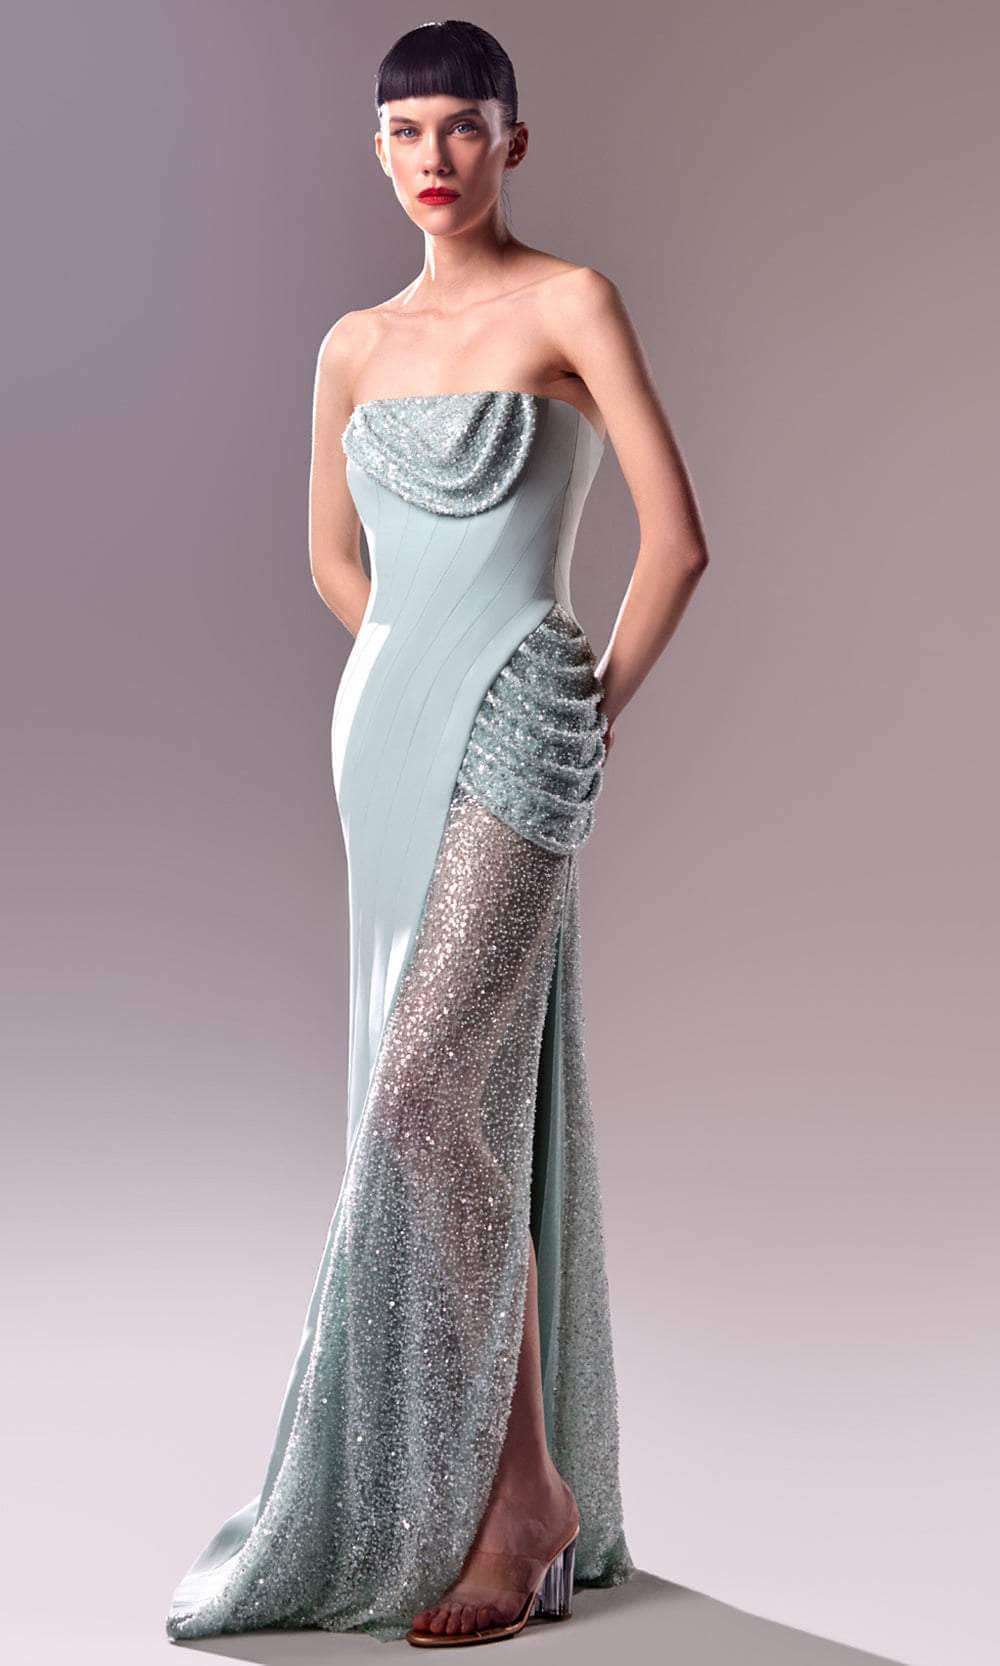 Image of MNM Couture G1613 - Strapless Beaded Mesh Embellished Gown